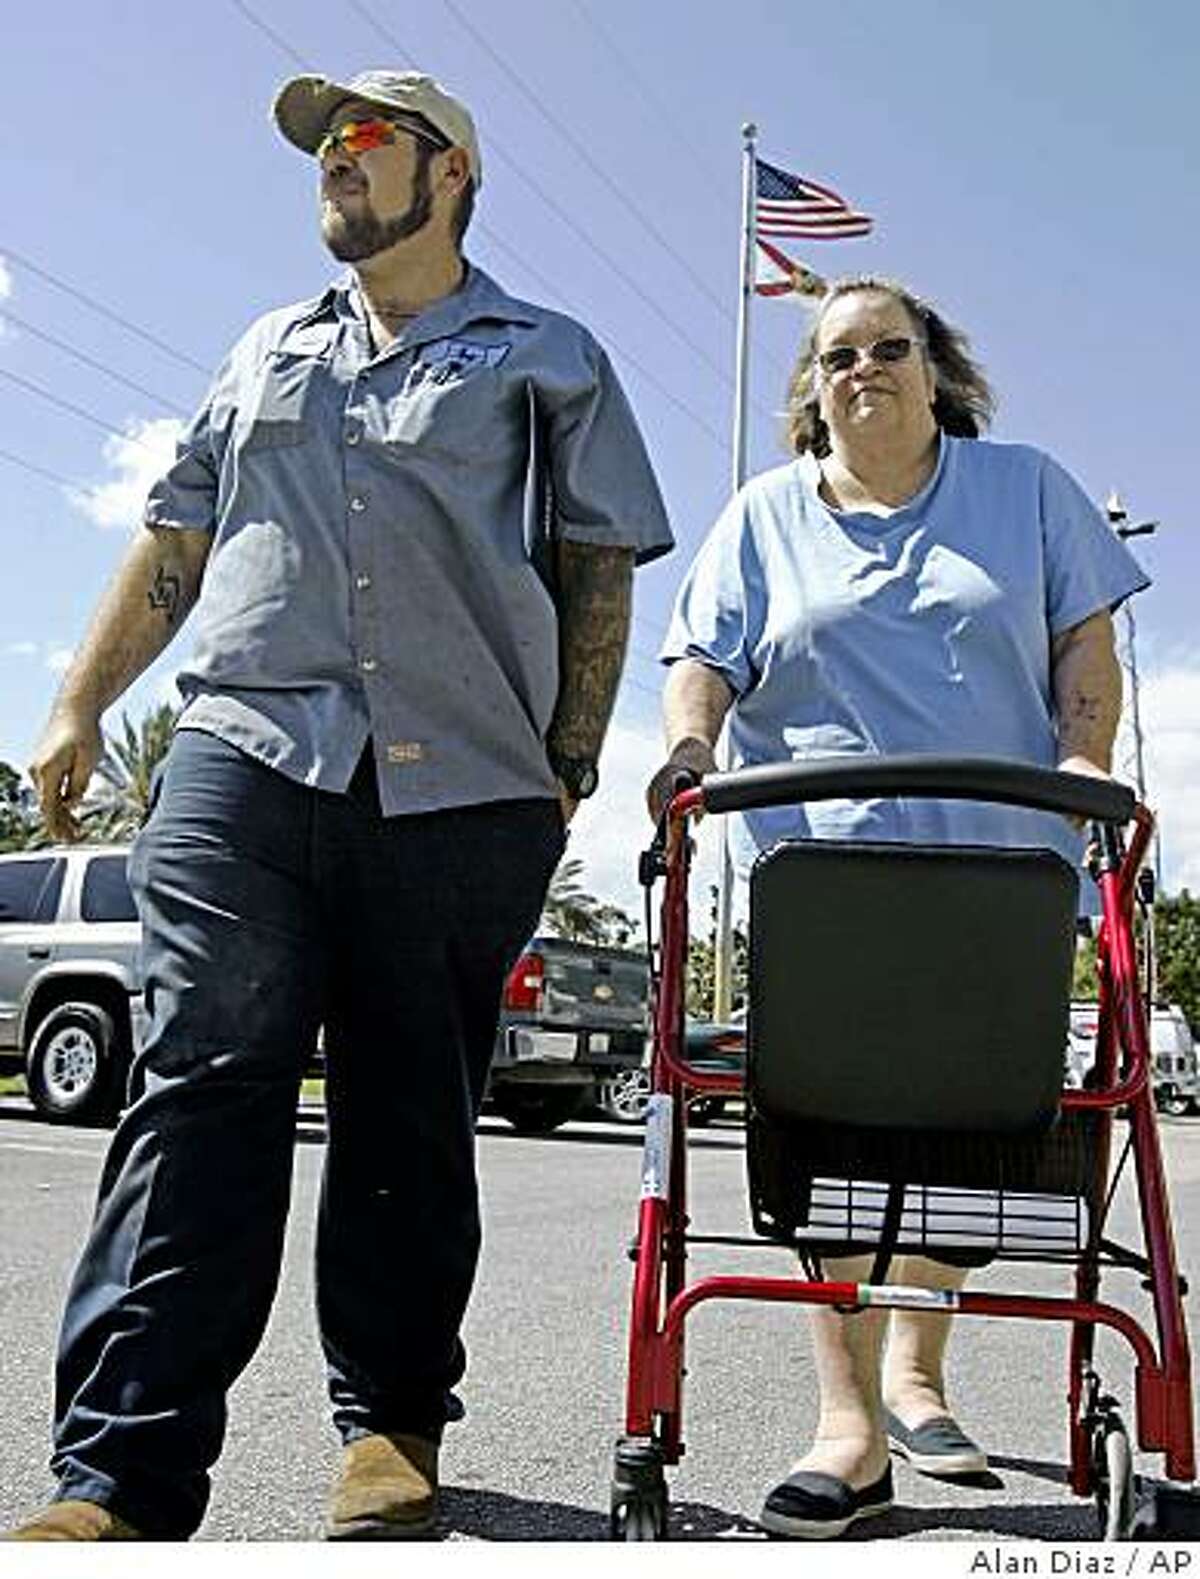 Bonnie Bigger, 60 (right) and her son Jason, 29, walk to their car after attending a foreclosure workshop in Fort Pierce, Fla., on Friday. Their lender began foreclosure proceedings against them for falling $4,500 behind on their $776-a-month mortgage payments on a condo they have been living in since 1984.